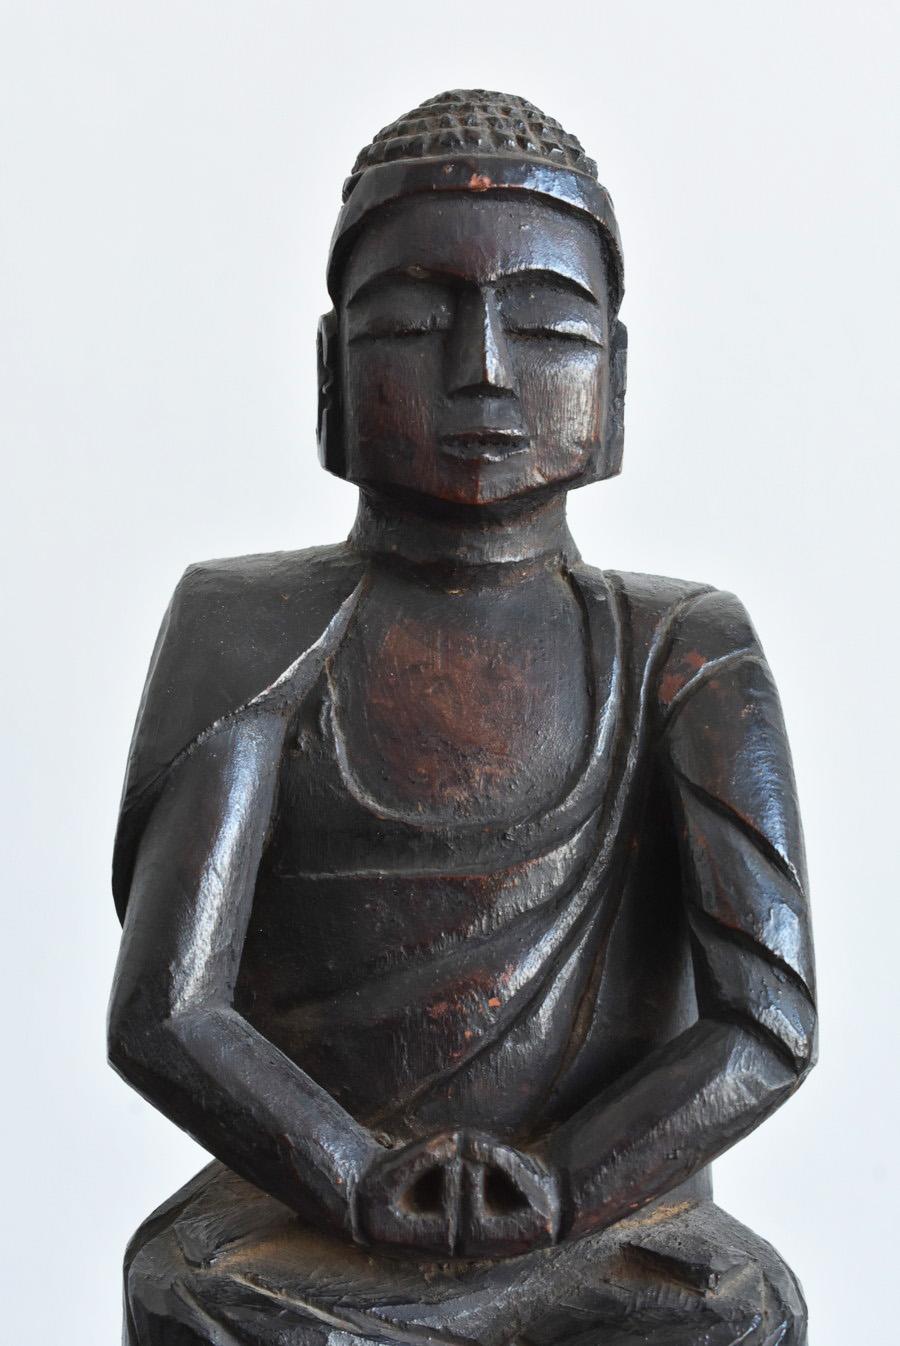 It is a wooden Buddha statue made in the Edo period in Japan.

And this pose is called 